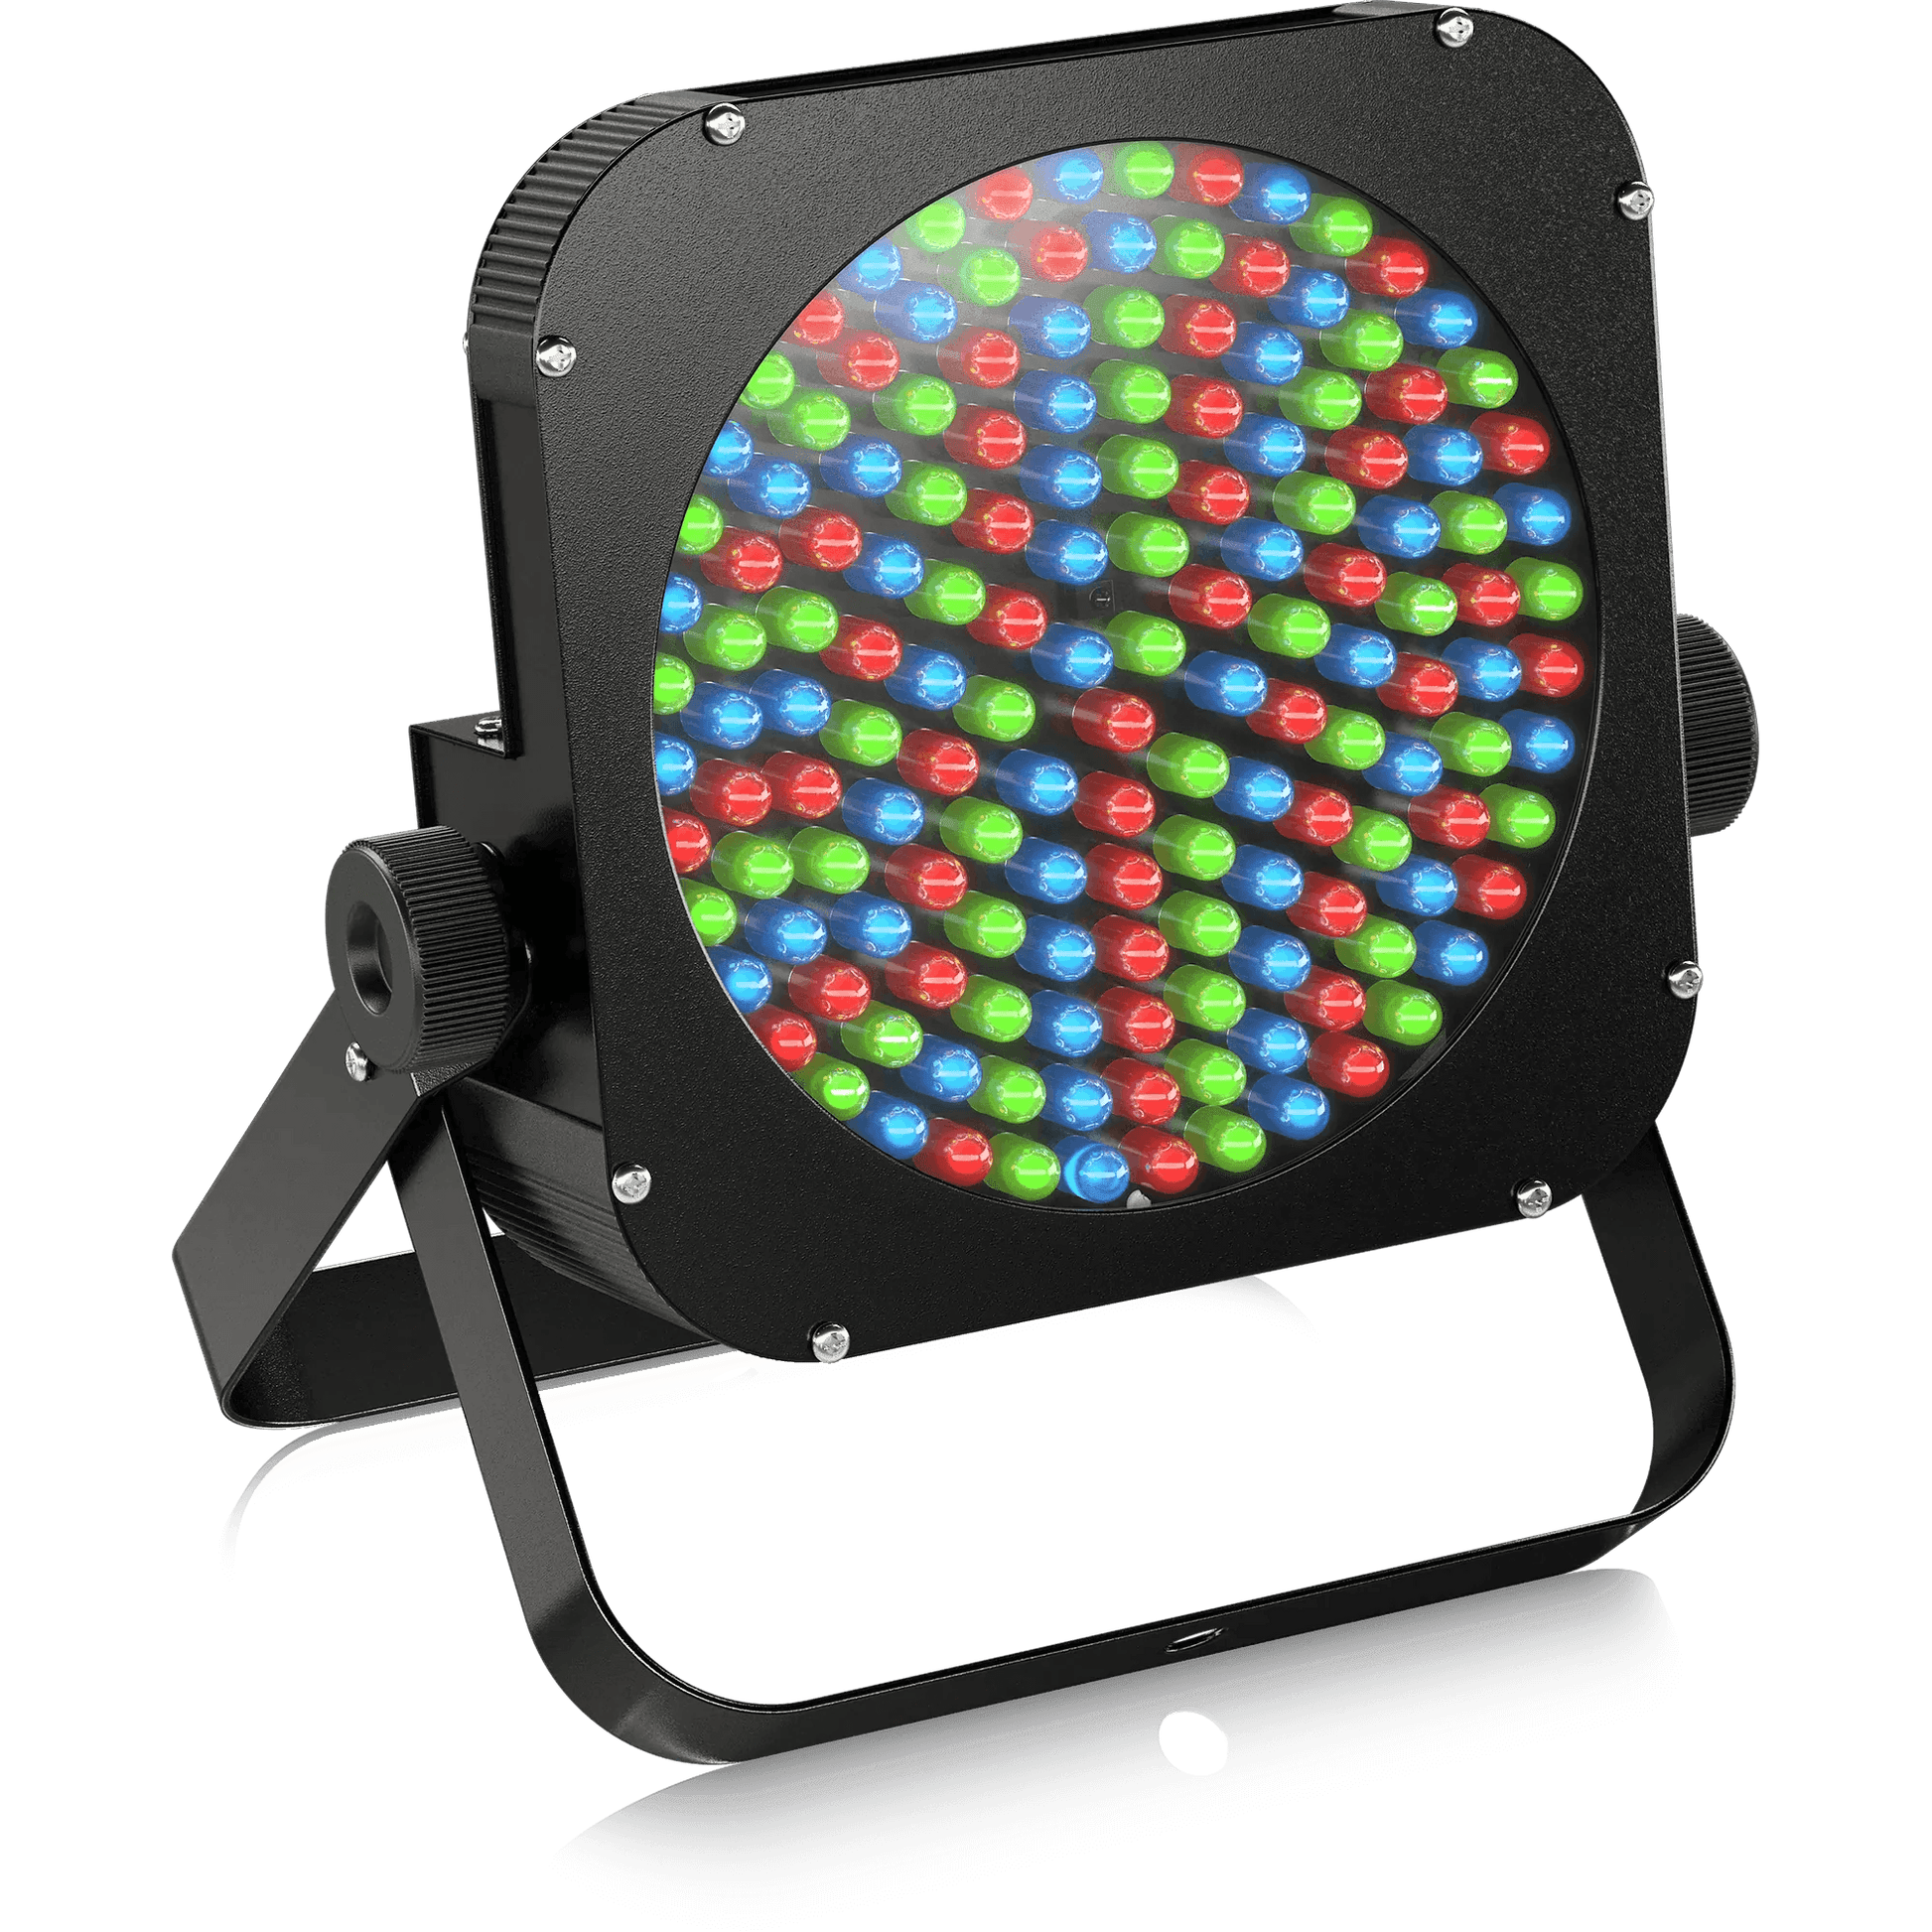 Behringer FLOOD PANEL FP150 Compact Floodlight with 150 RGB LED